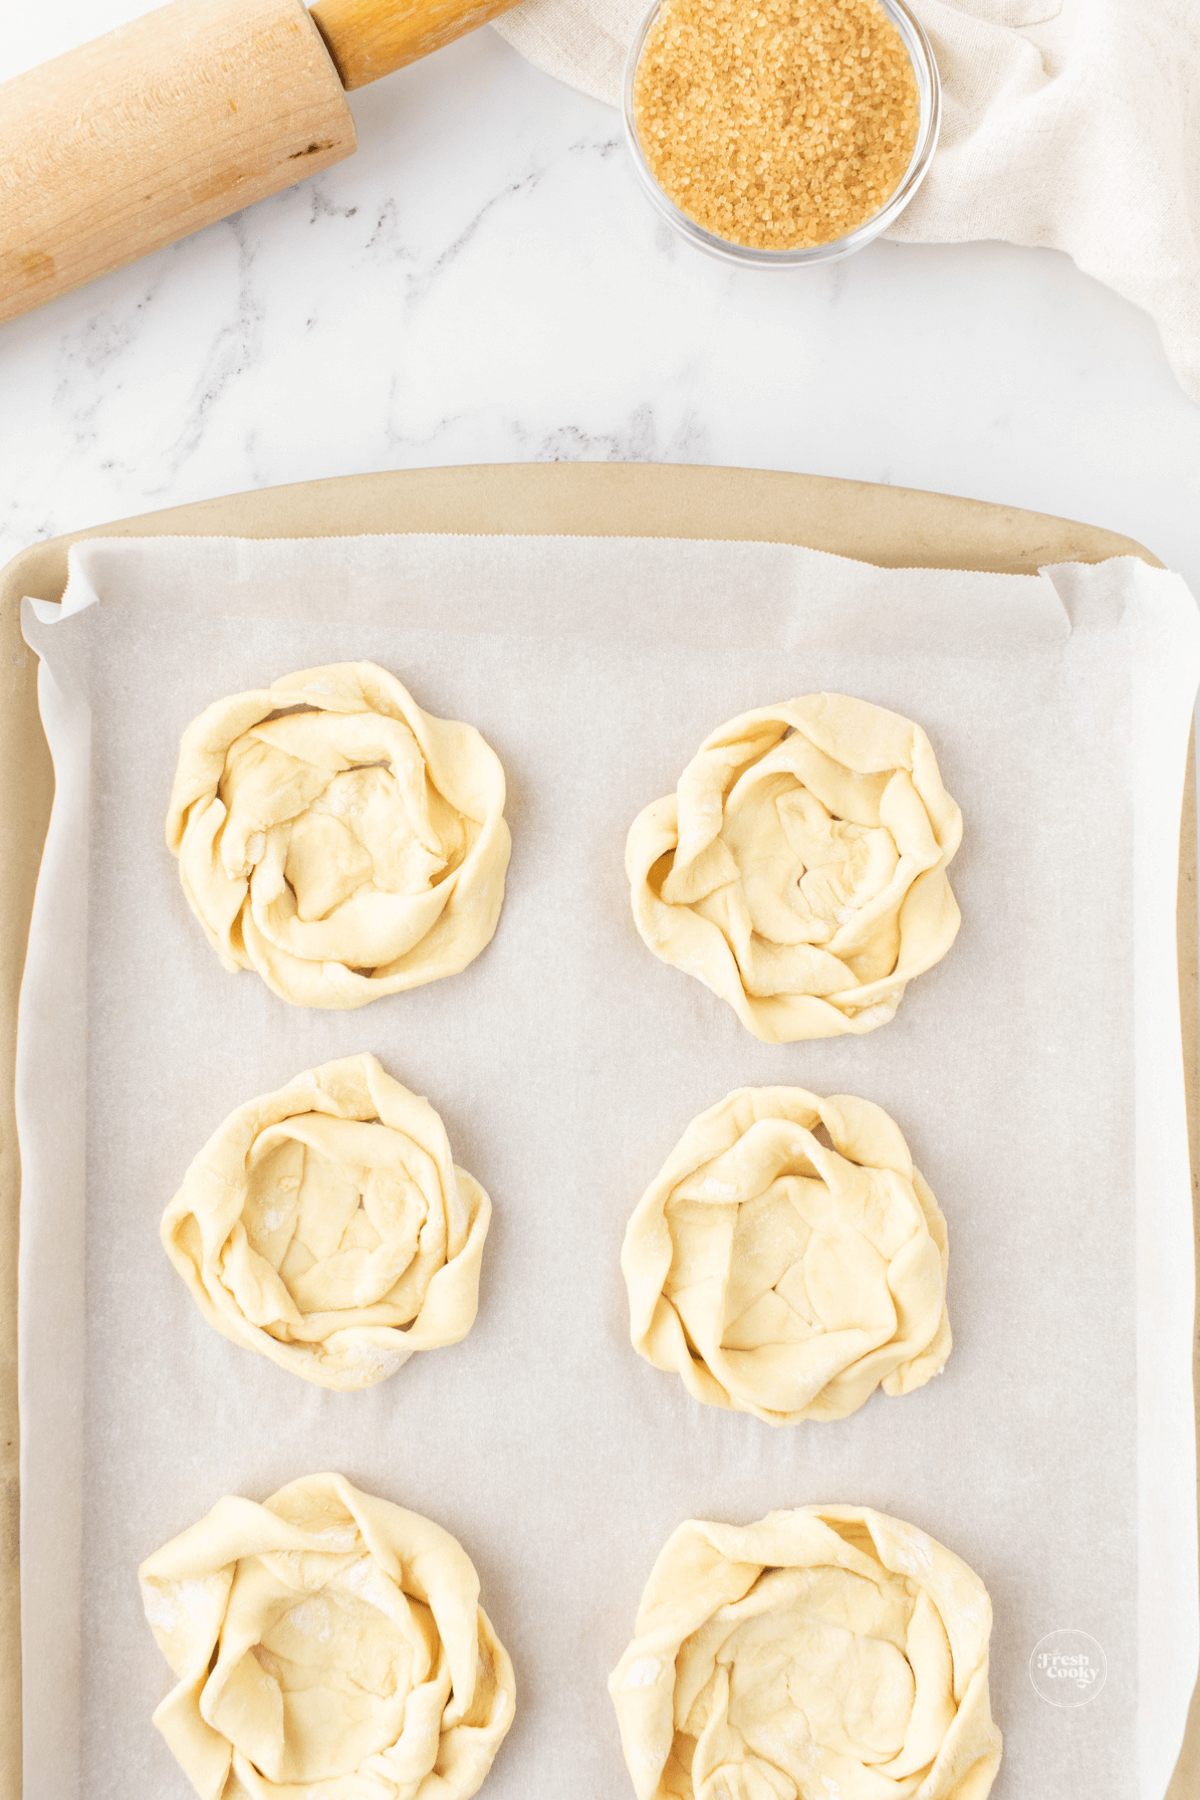 Puff pastry nests on baking sheet with parchment paper.